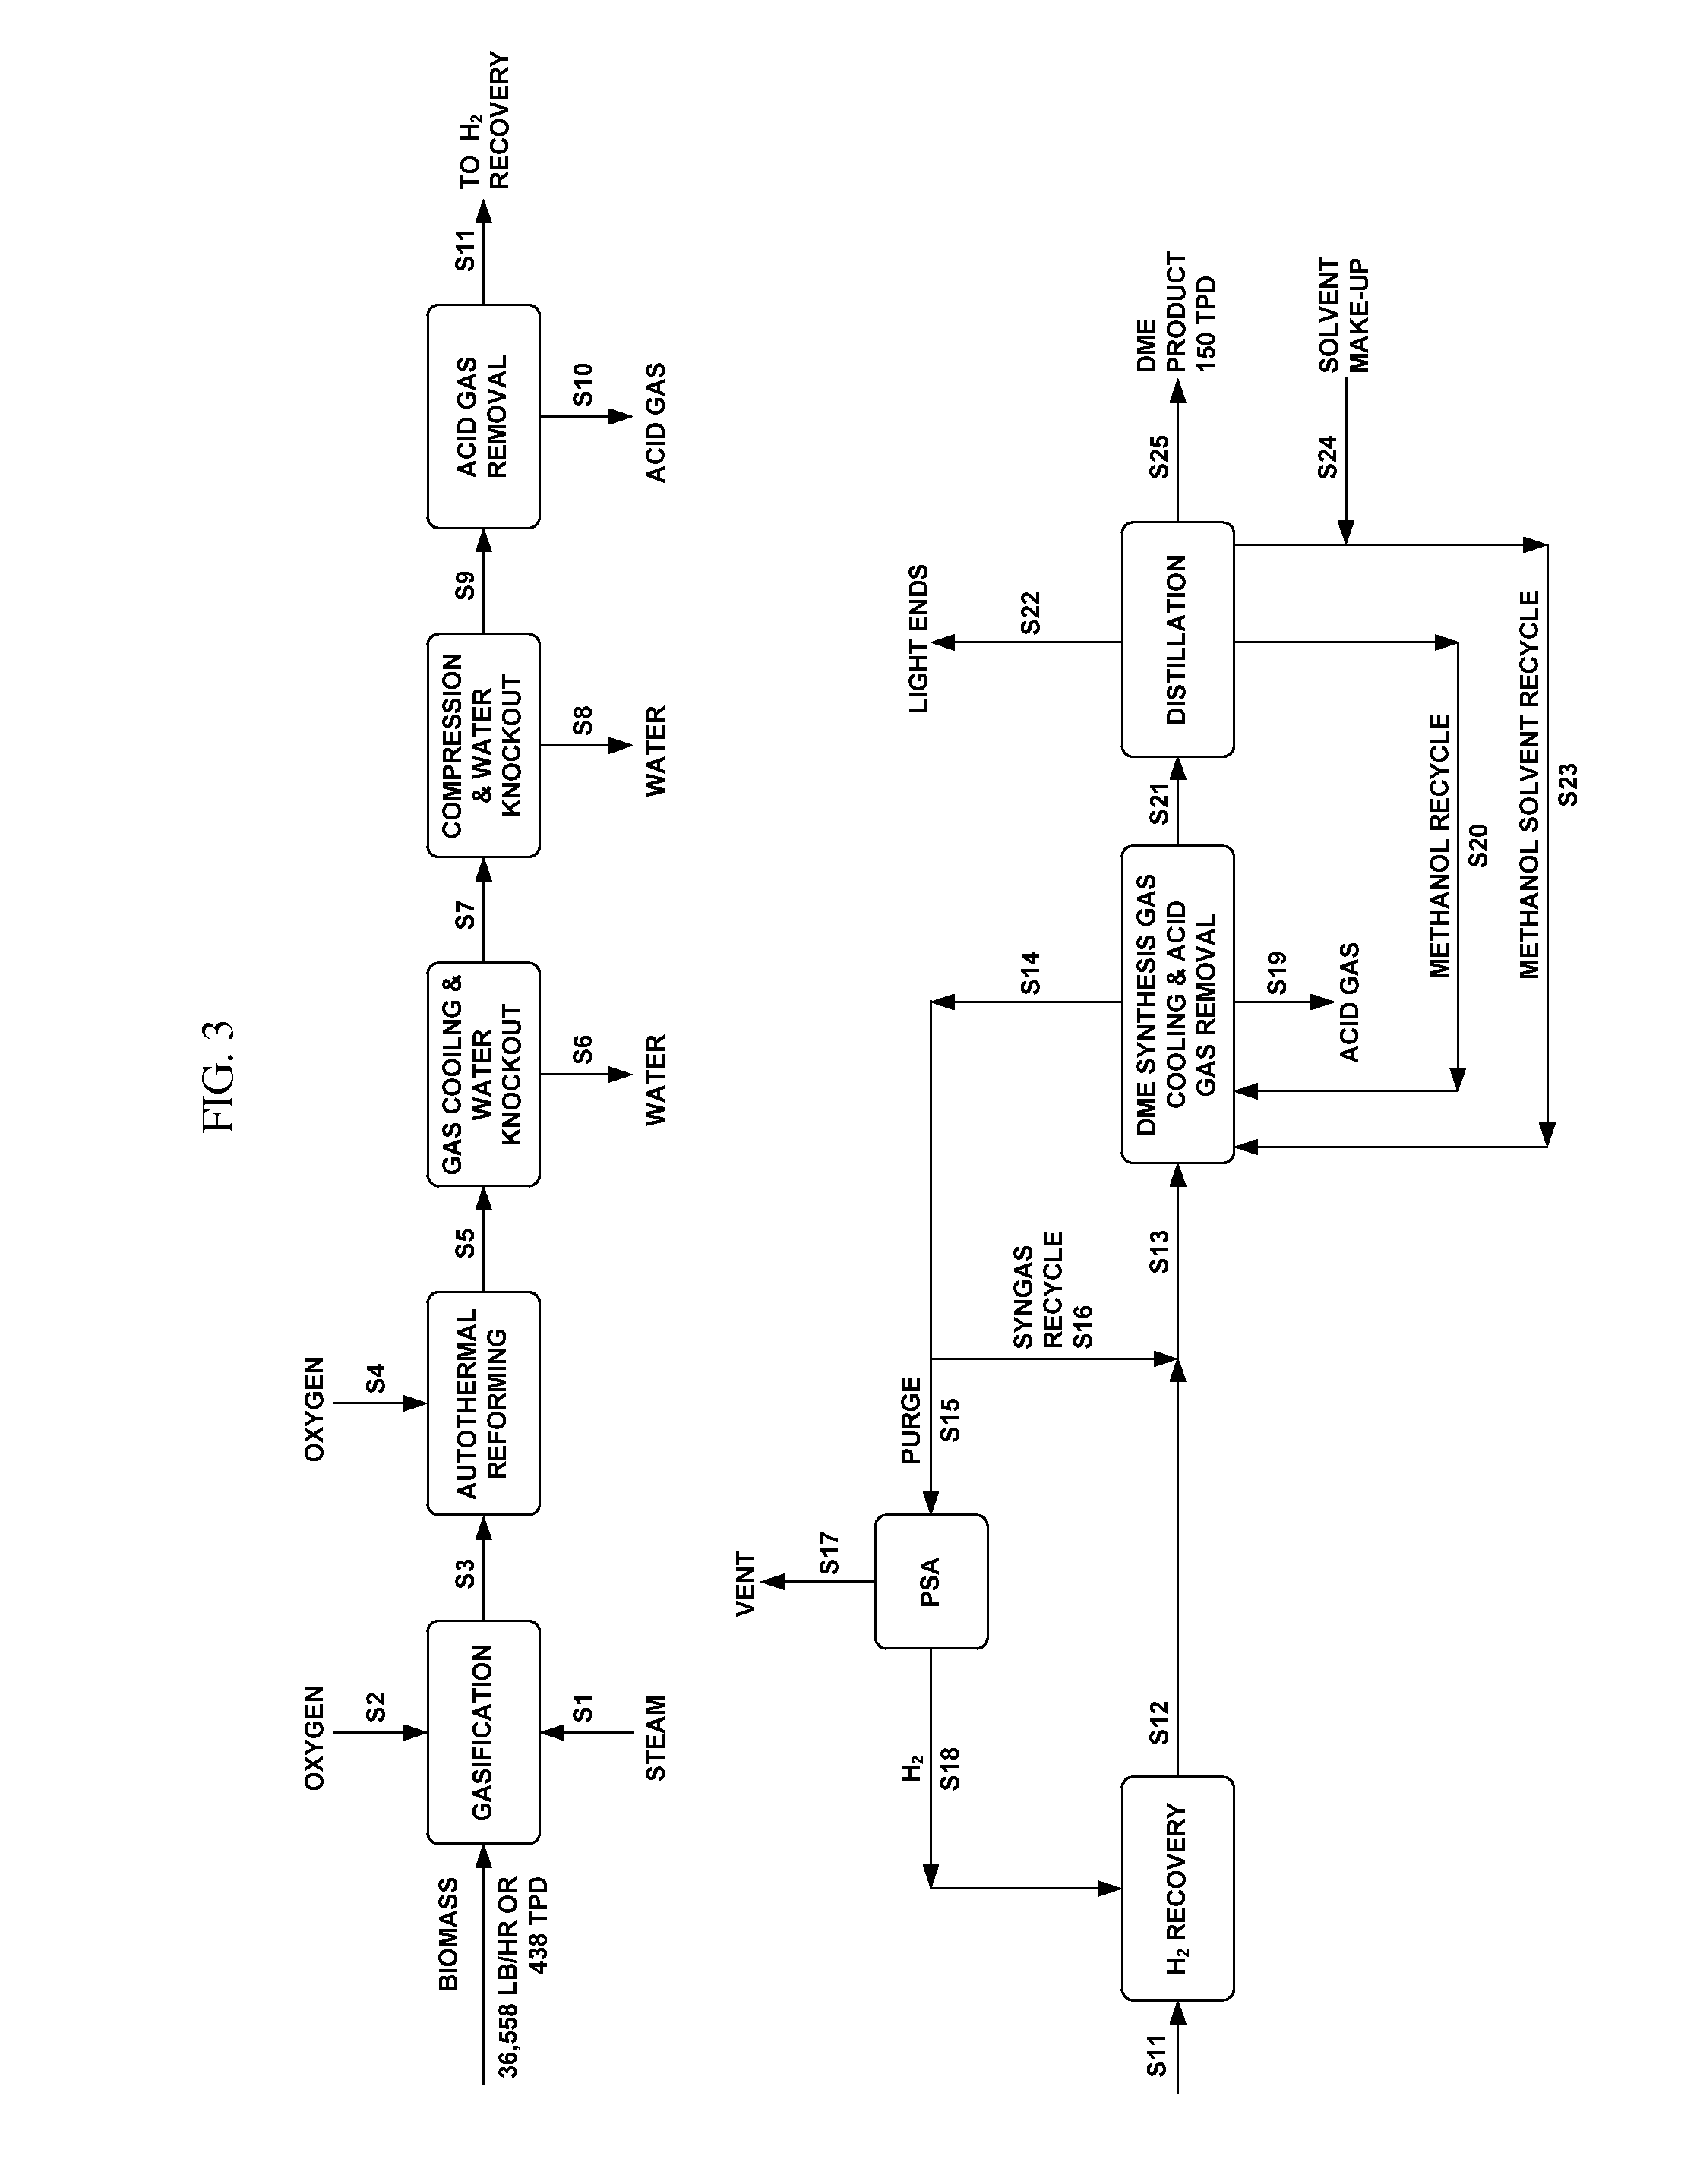 Synthesis of DME using a fluid pluralized bed reactor